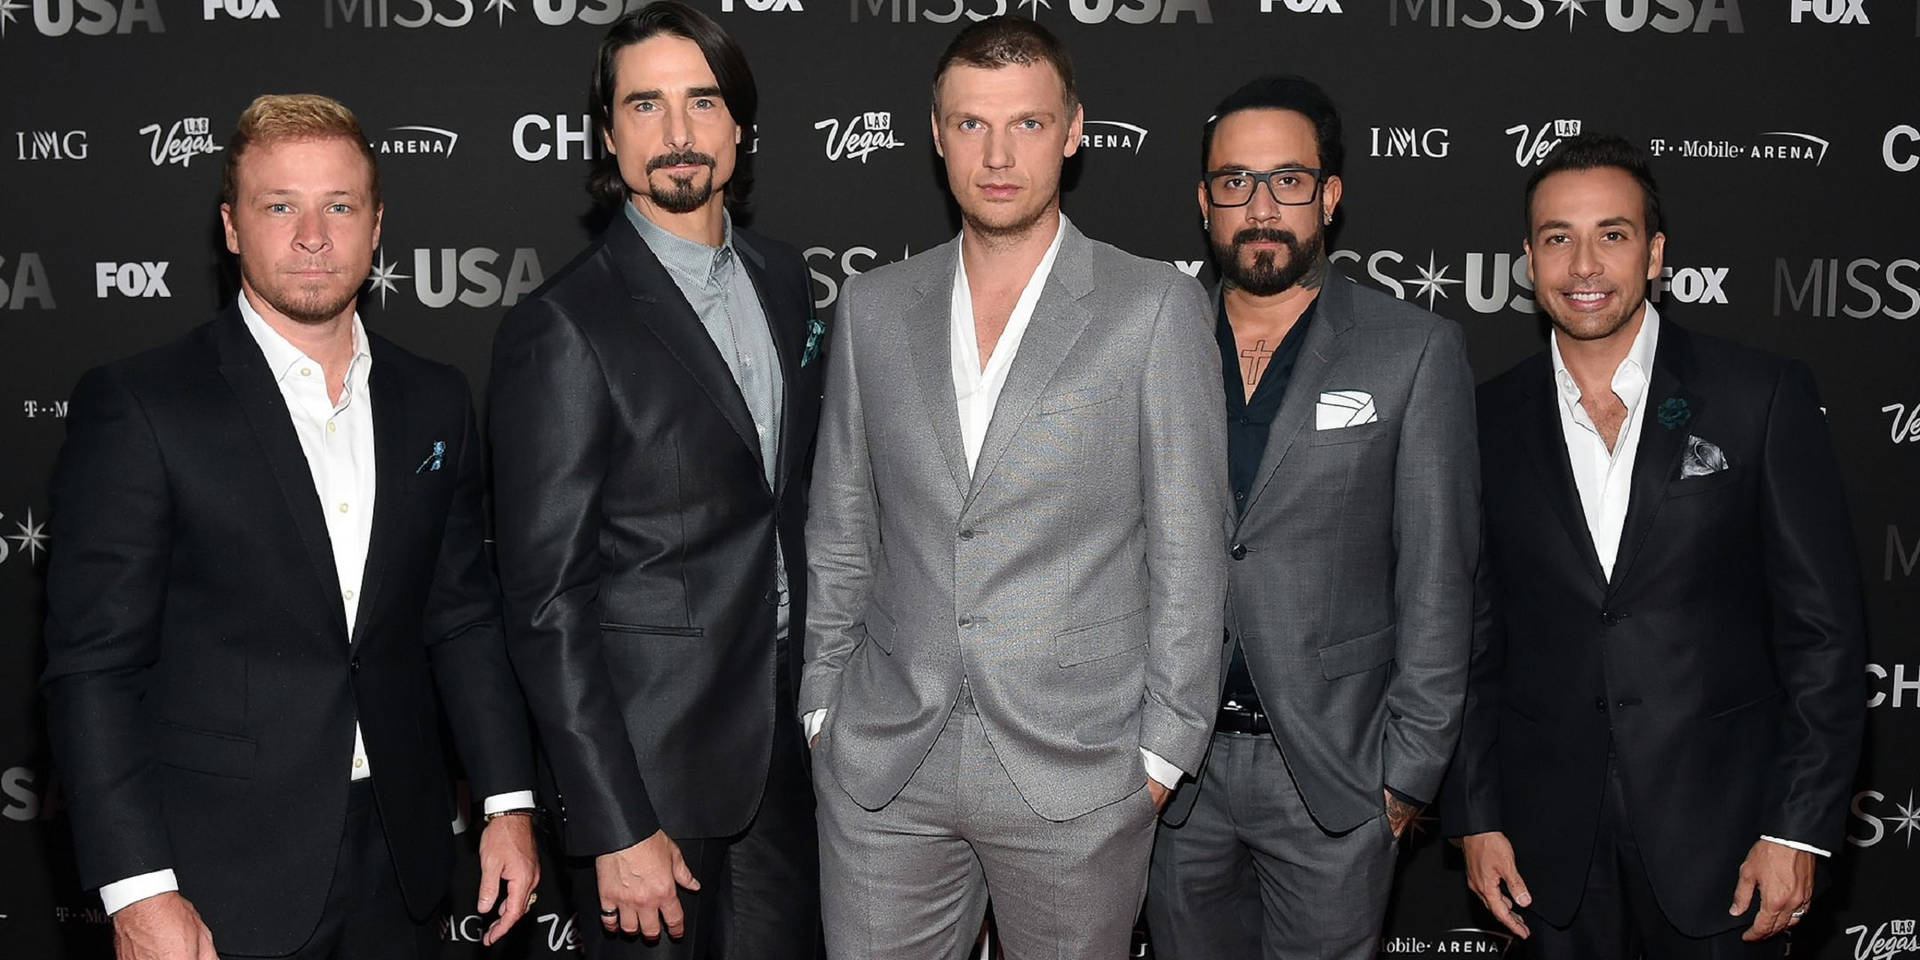 The Backstreet Boys Performing At The Miss Usa Pageant Background